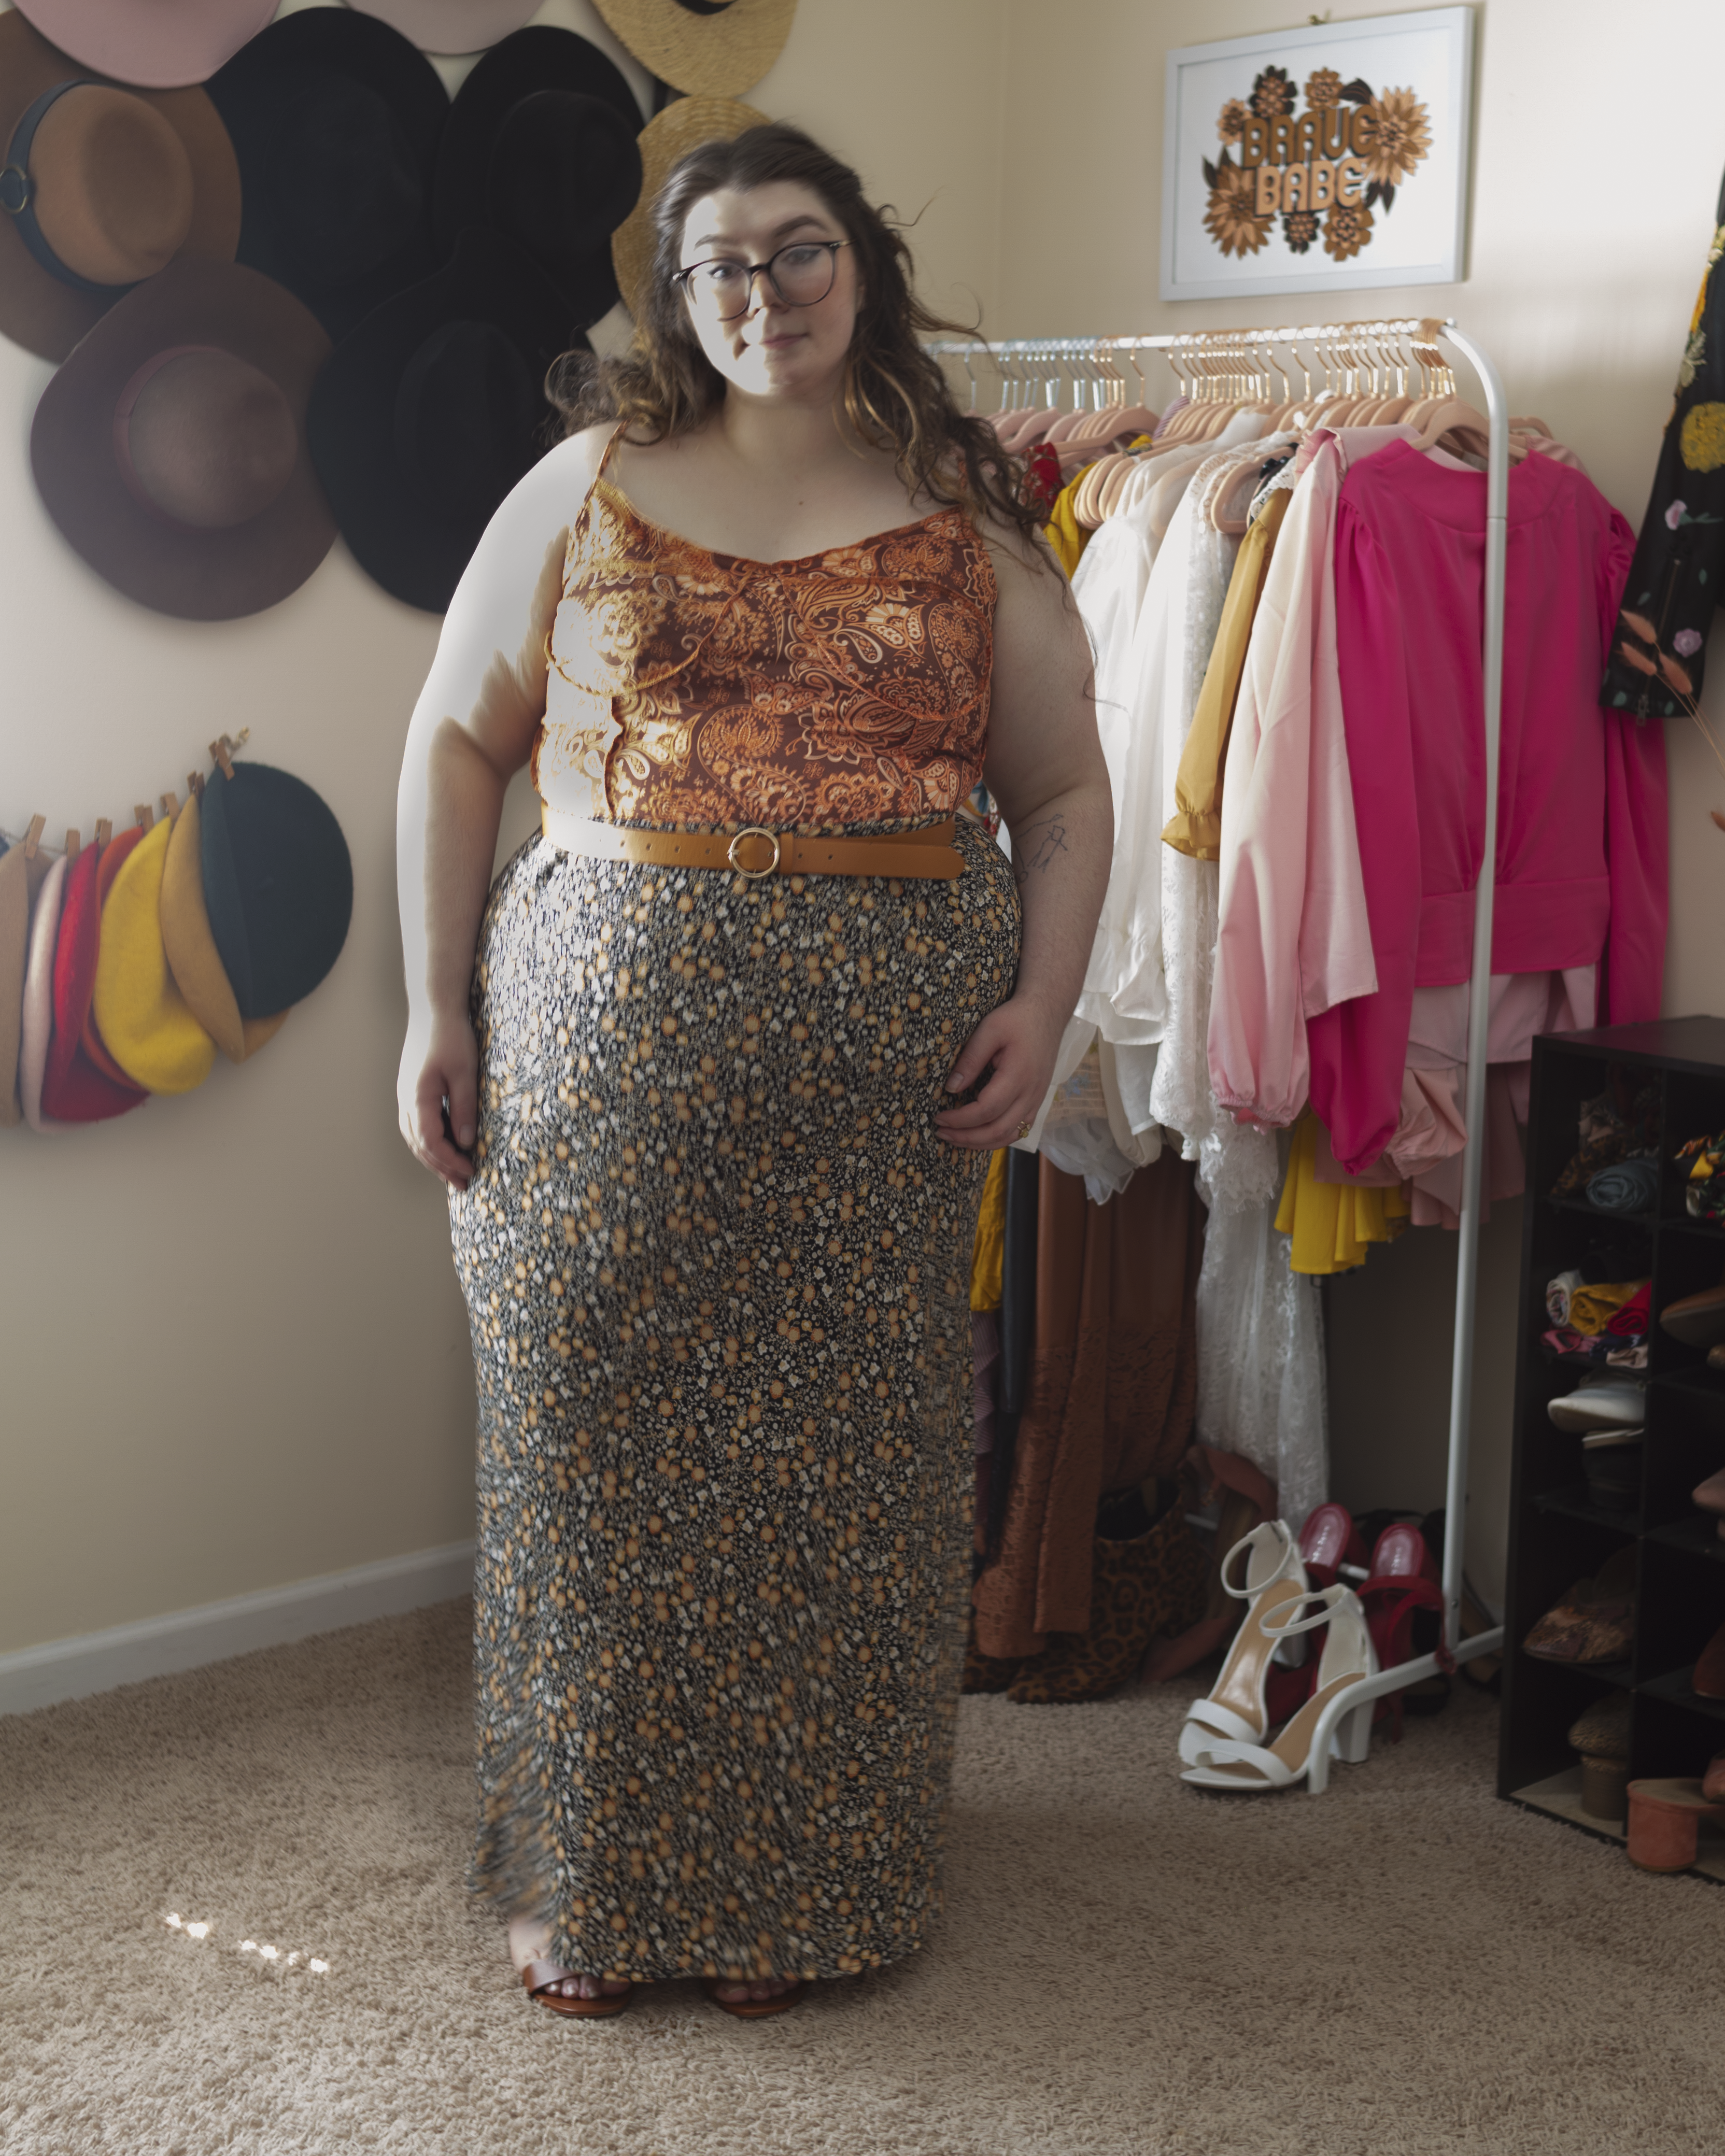 An outfit consisting of an orange and brown bandana print top and a black, brown, and orange floral skirt and cognac brown heeled sandals.